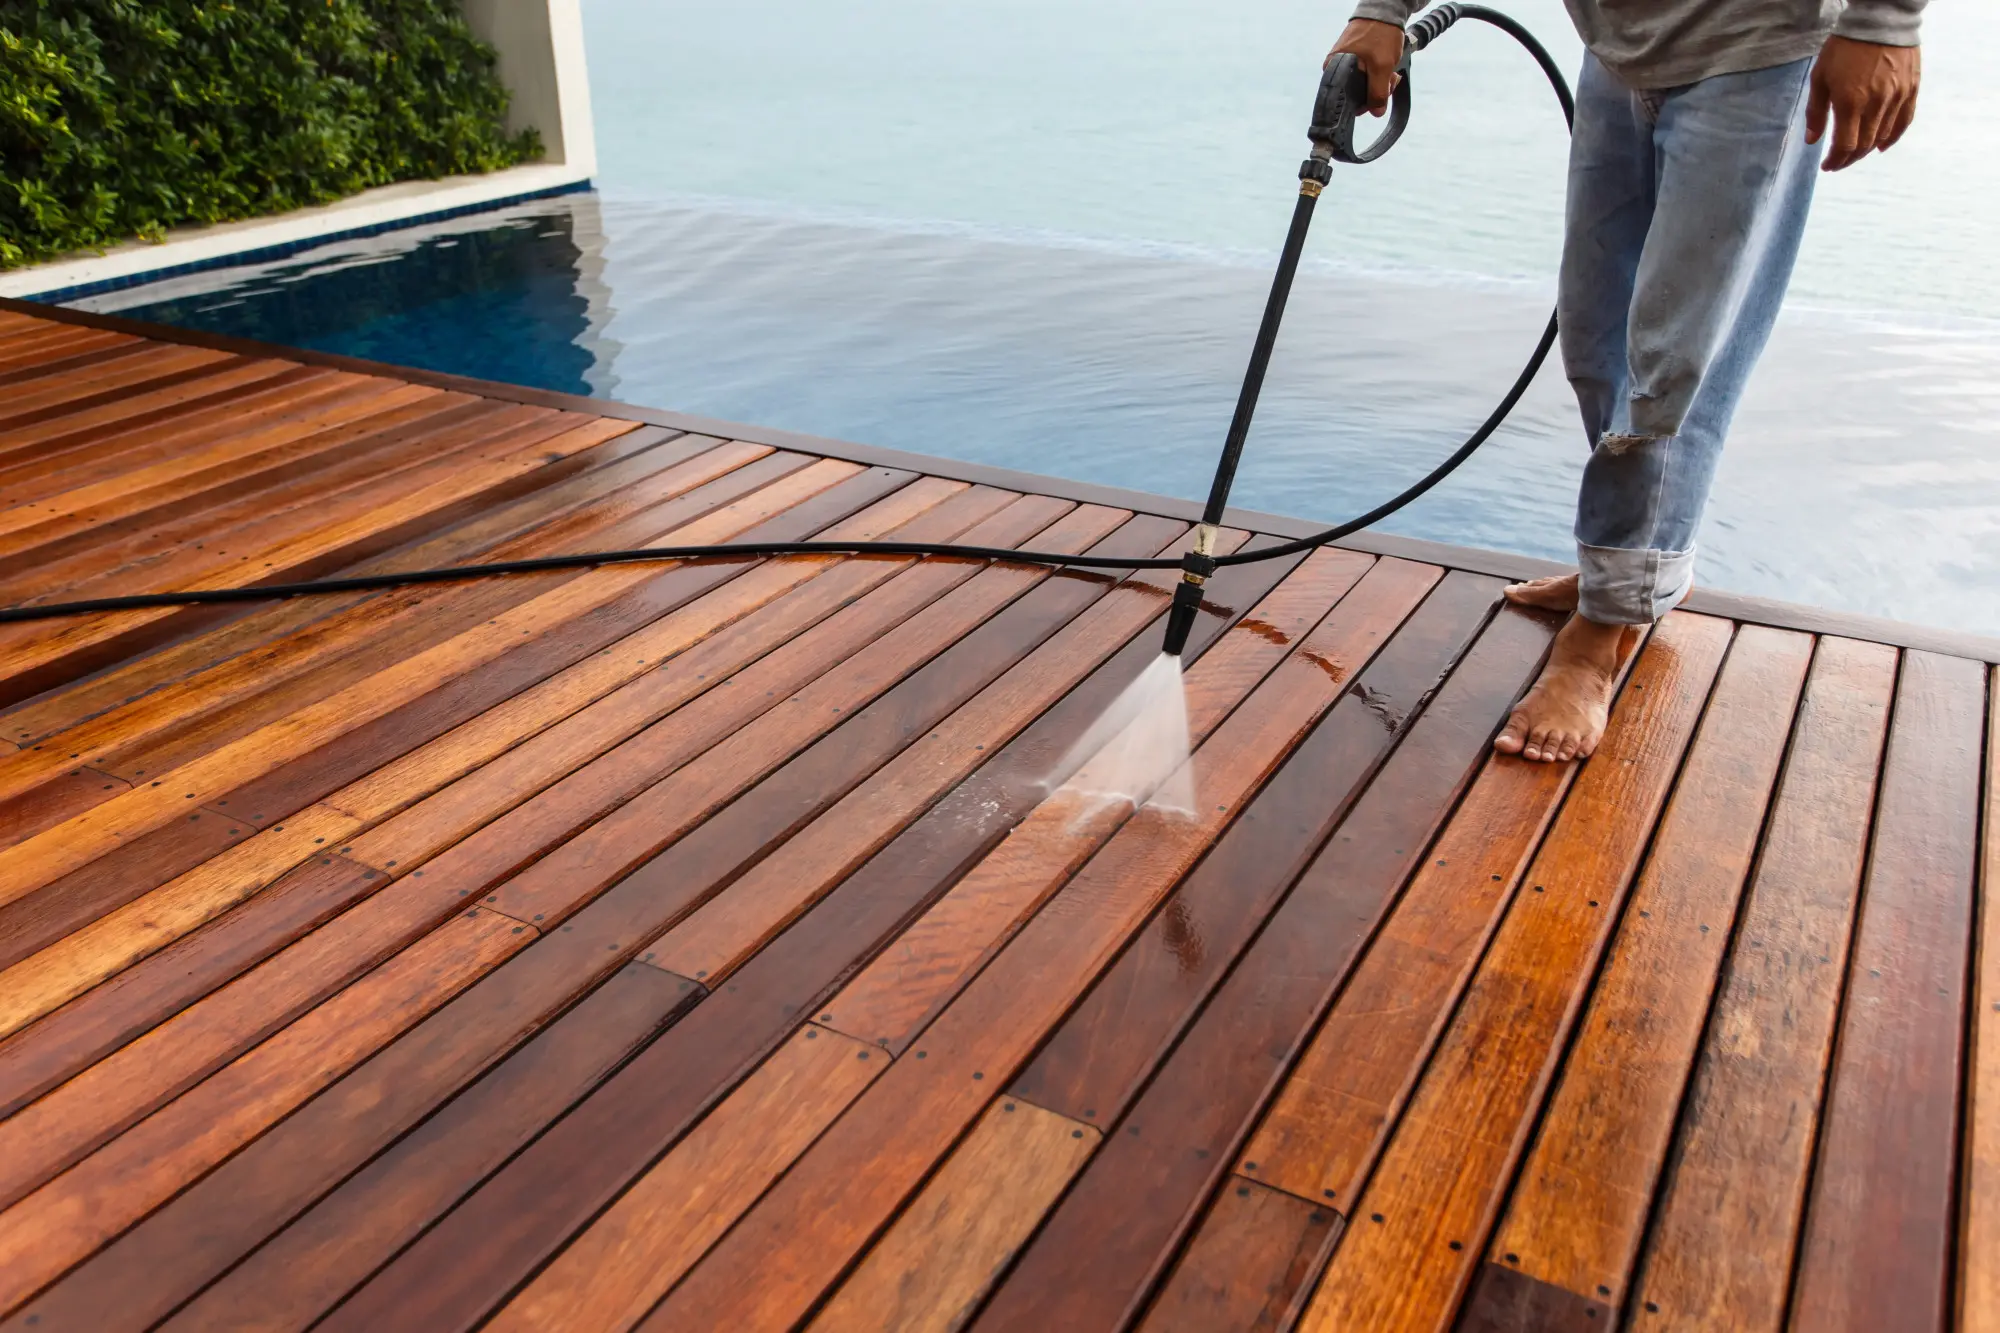 Tips For Installing And Maintaining A Pool Deck